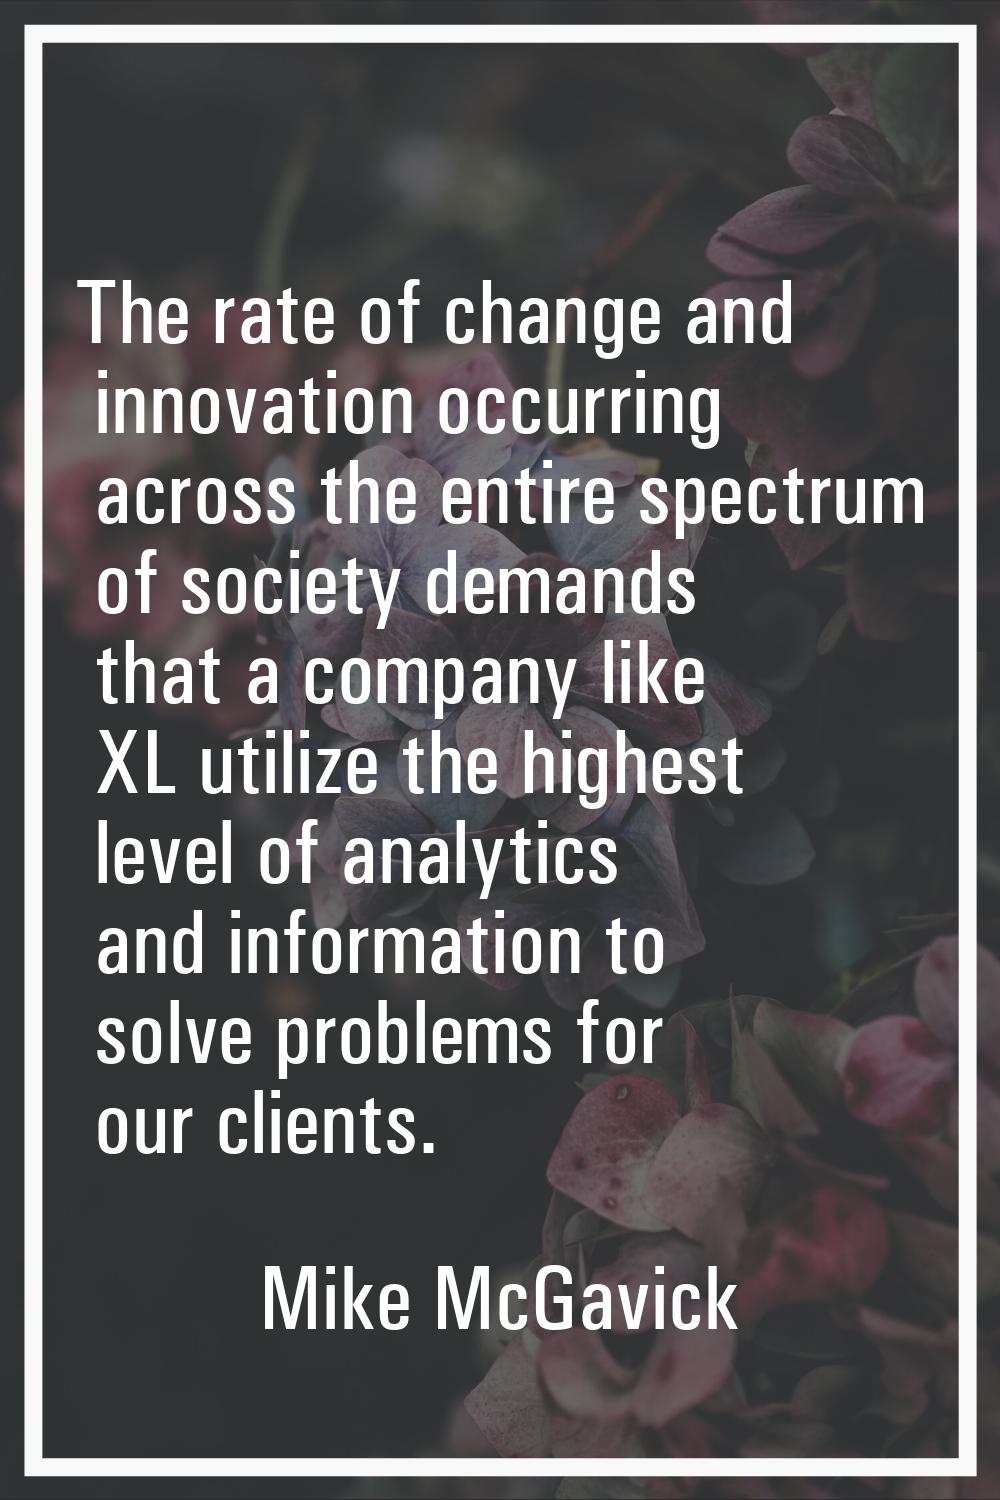 The rate of change and innovation occurring across the entire spectrum of society demands that a co